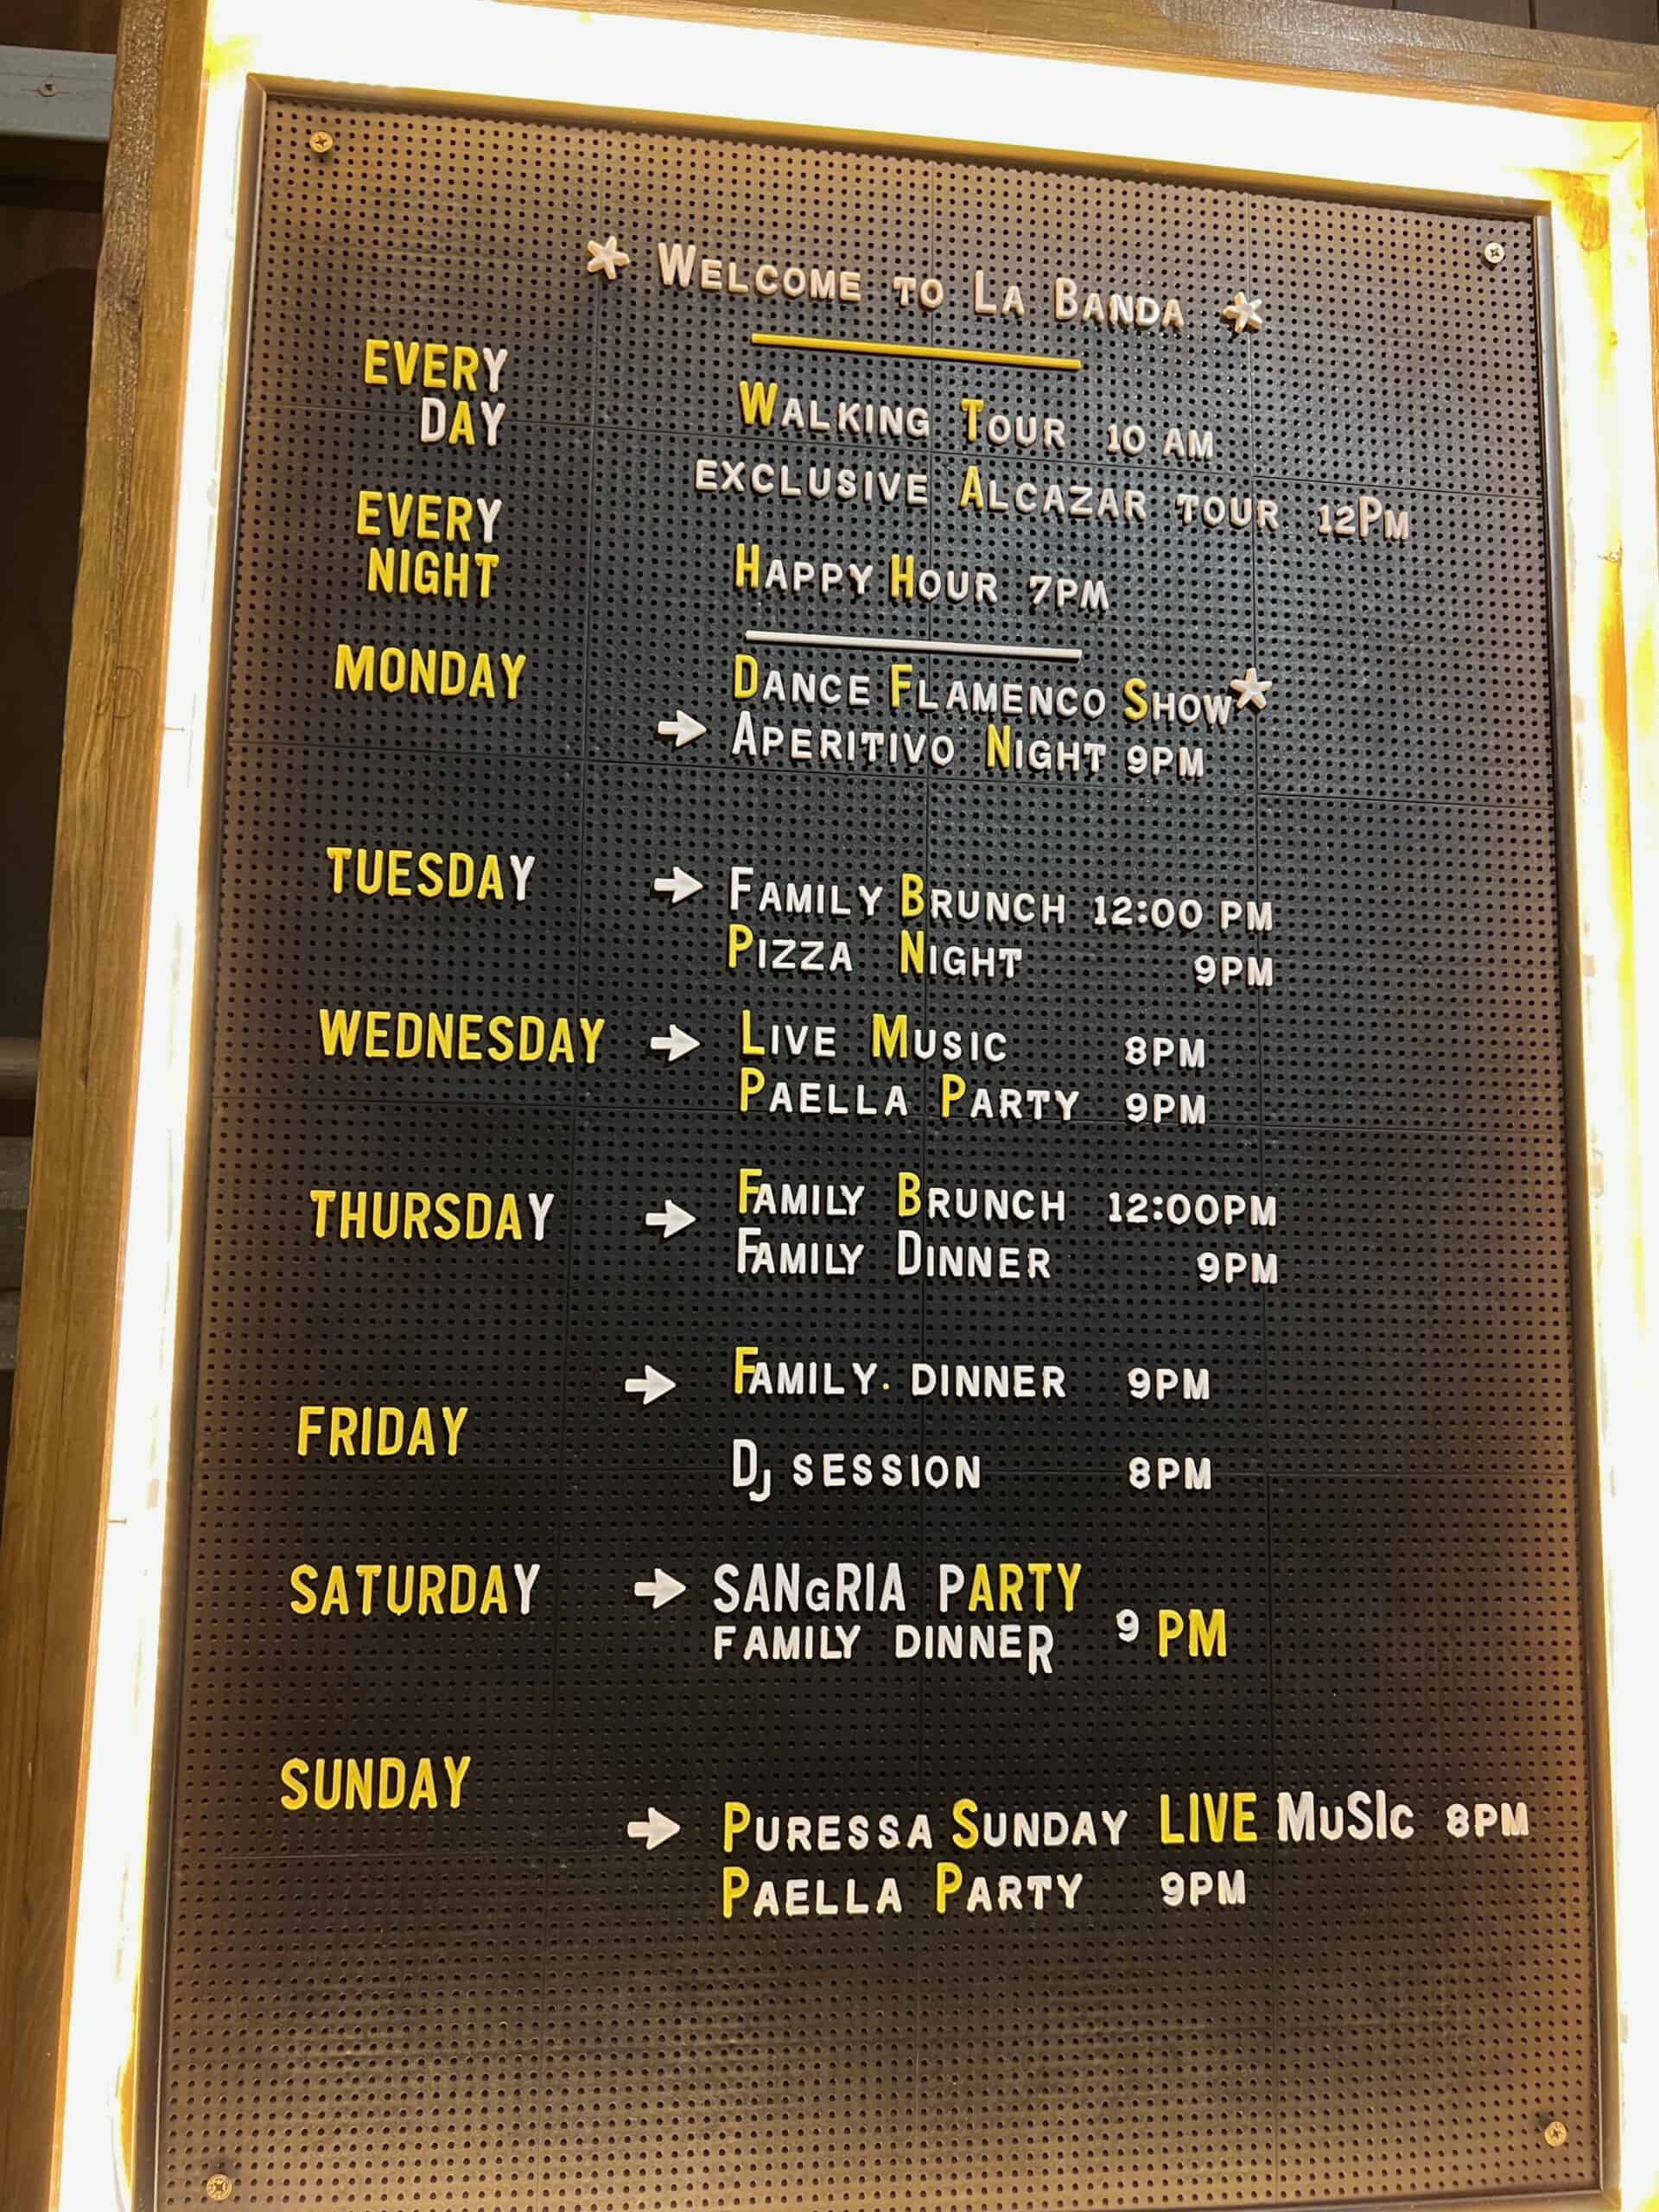 A board listing the weekly activities scheduled at a hostel in Seville, Spain